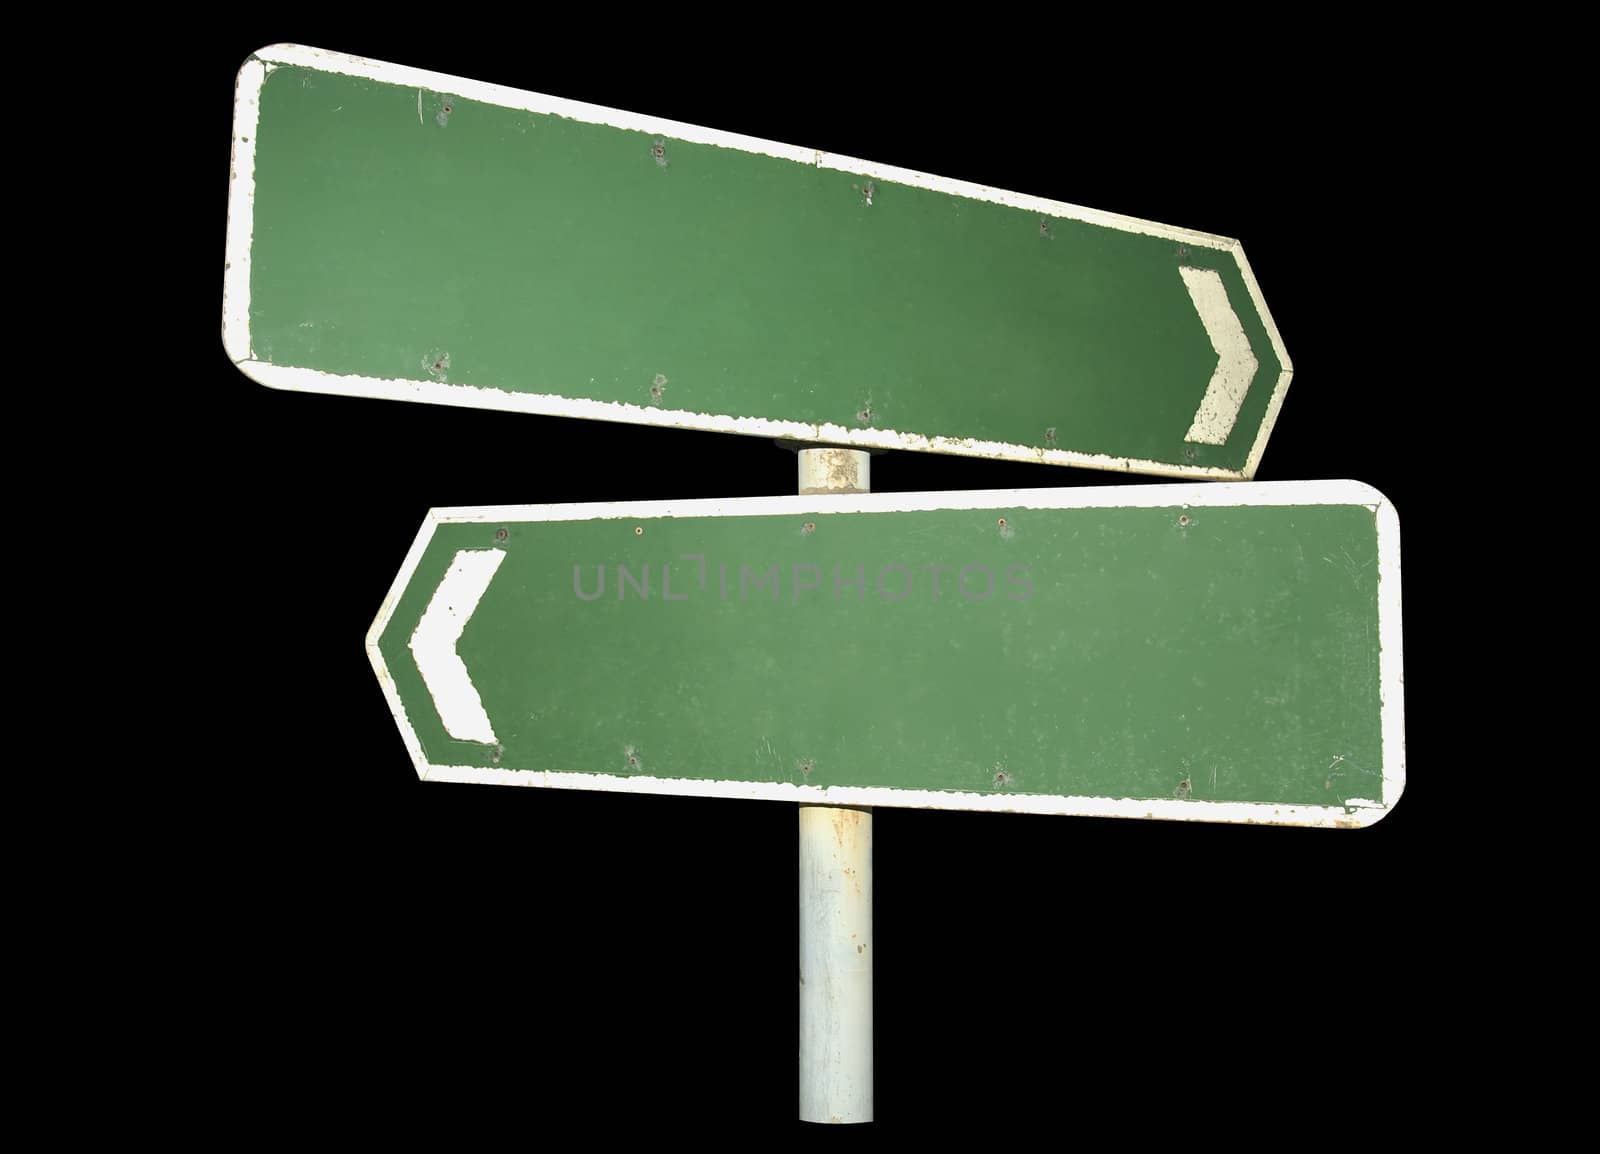 Two blank signboards, pointing in opposite directions, on a black background. Clipping path included so signs can be placed on any background.